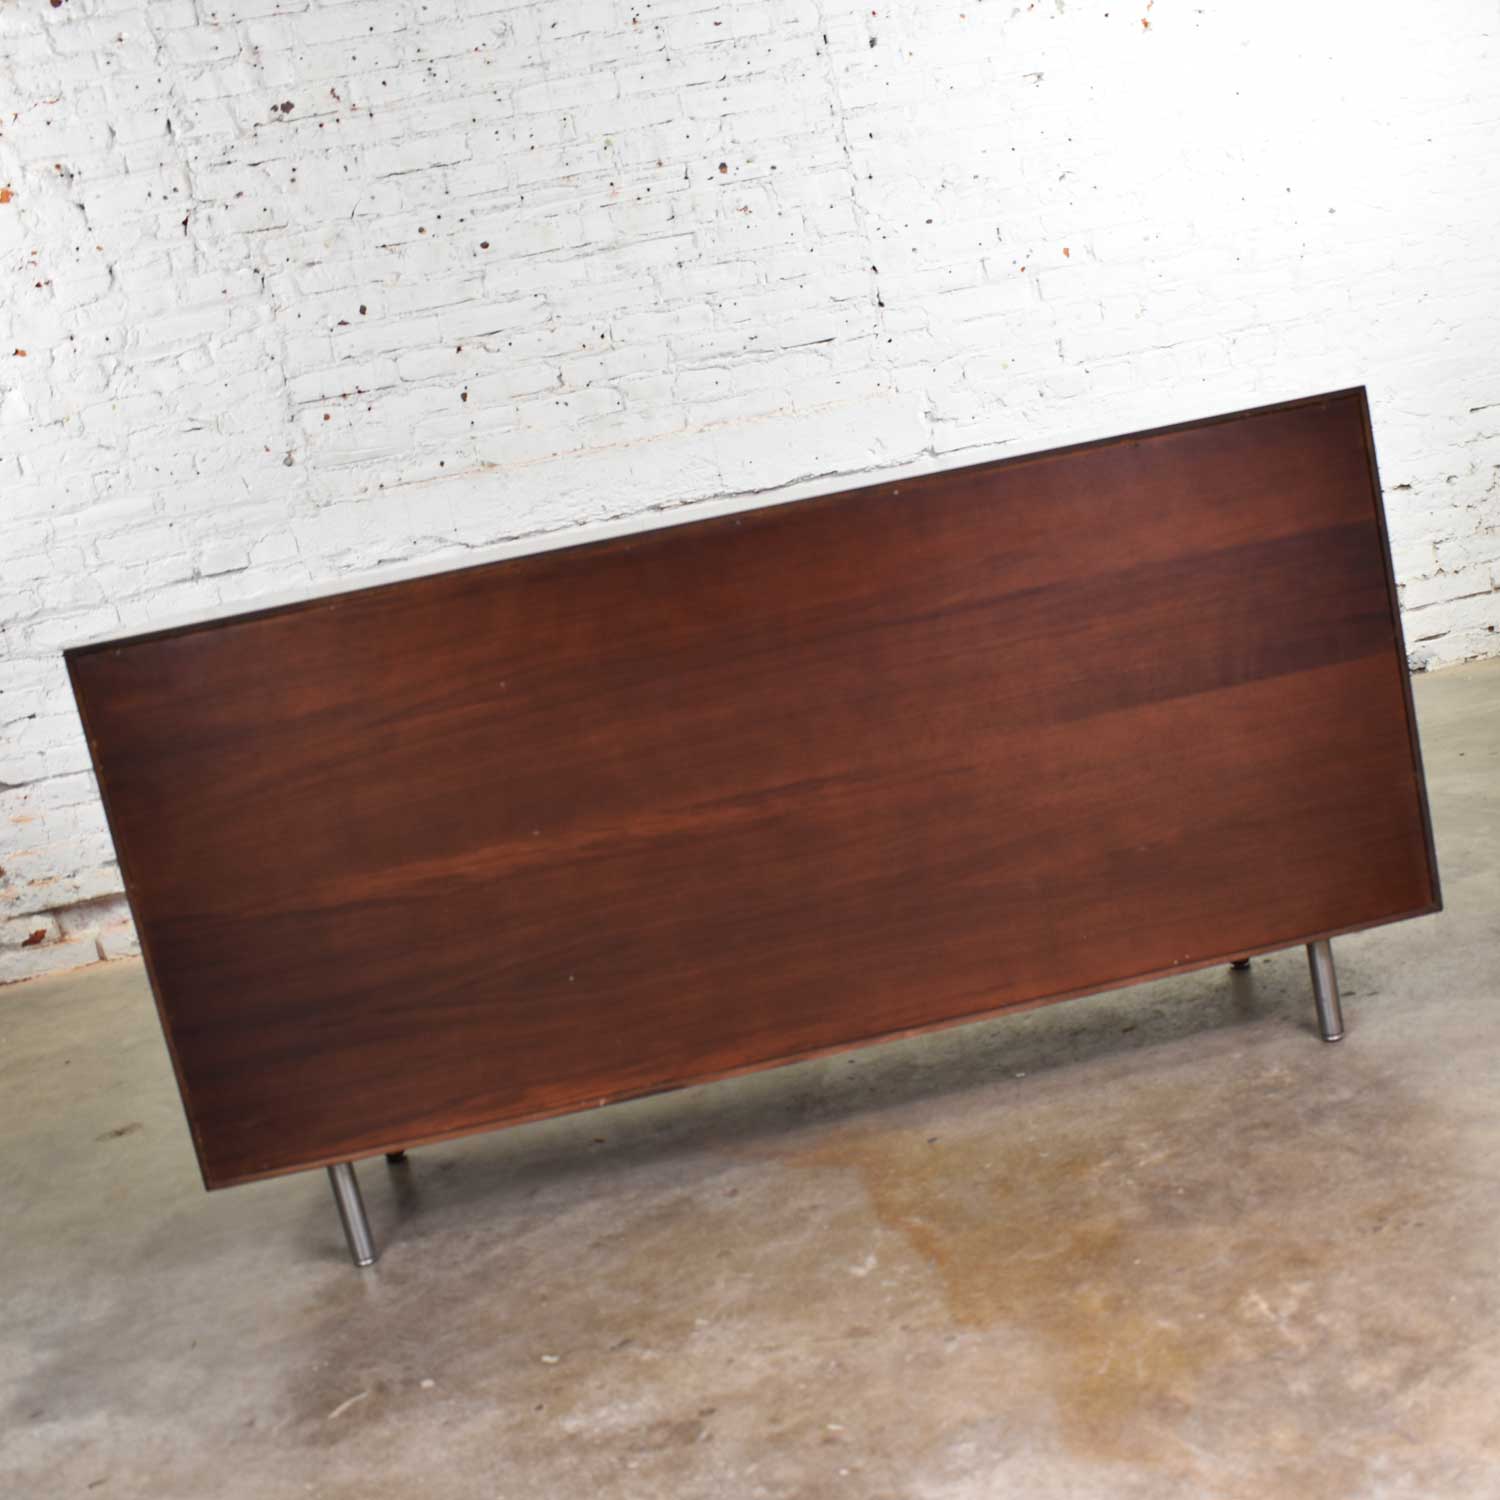 Early Basic Cabinet Series Walnut Sideboard Credenza by George Nelson for Herman Miller